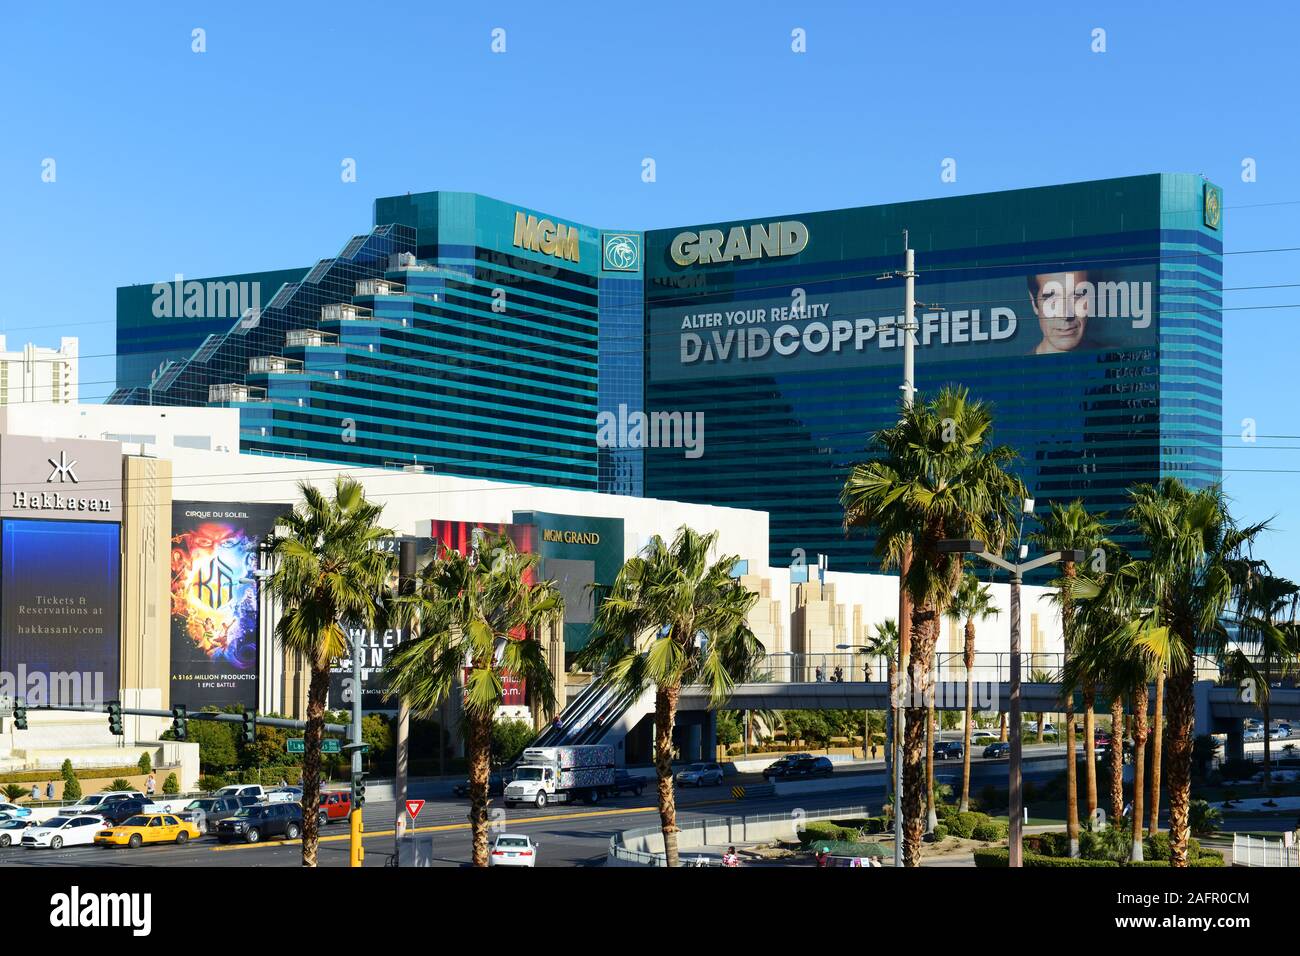 MGM Grand Las Vegas on Las Vegas Strip in Las Vegas, Nevada, USA. The hotel is the largest single hotel in the United States owned by MGM Resorts. Stock Photo